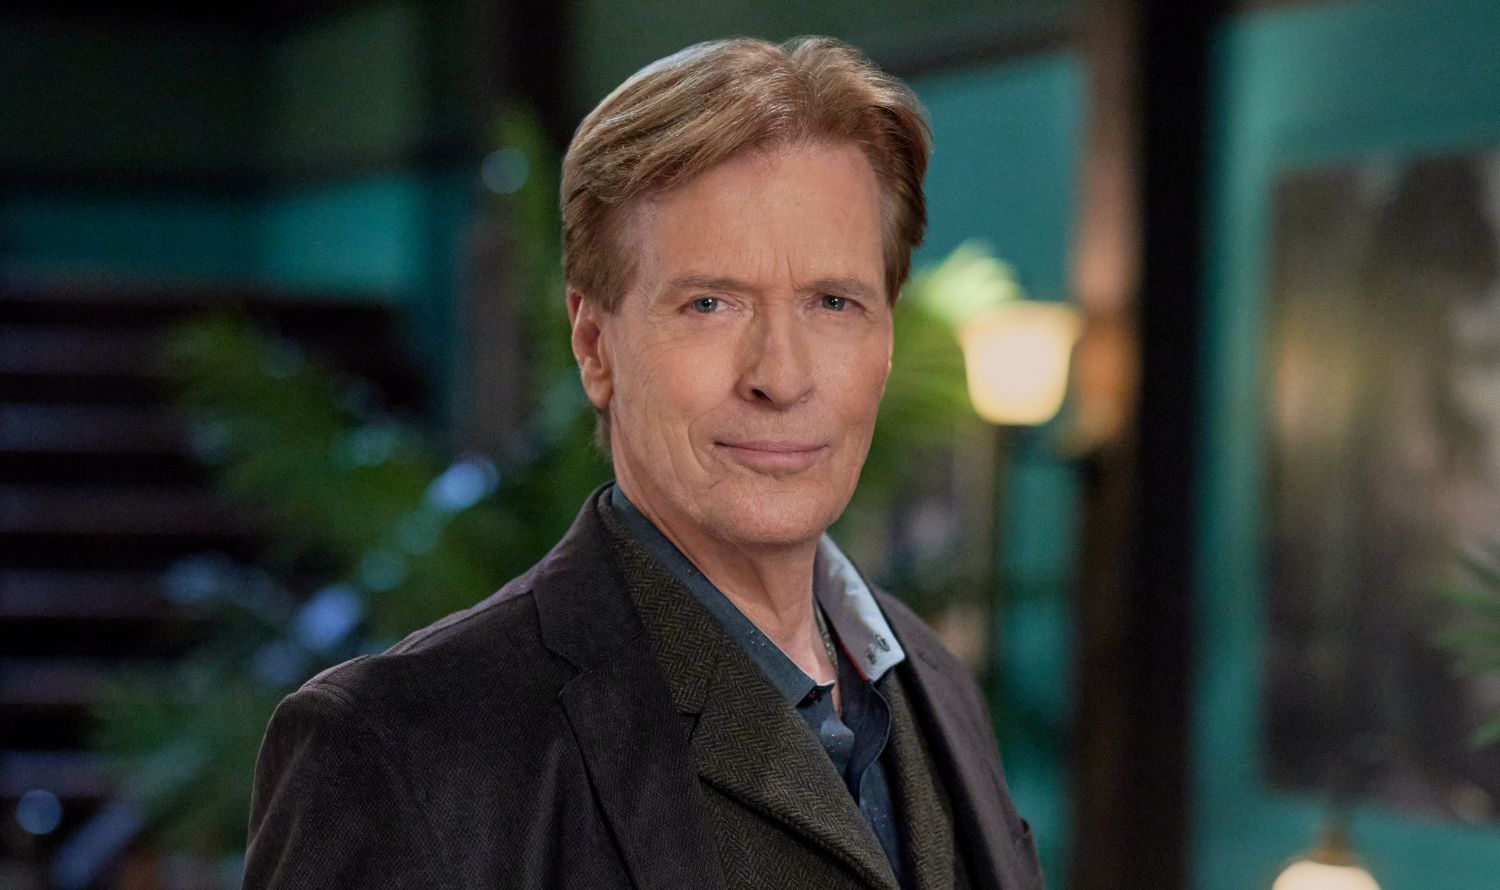 When Calls the Heart star Jack Wagner on what he wants for his character in season 12